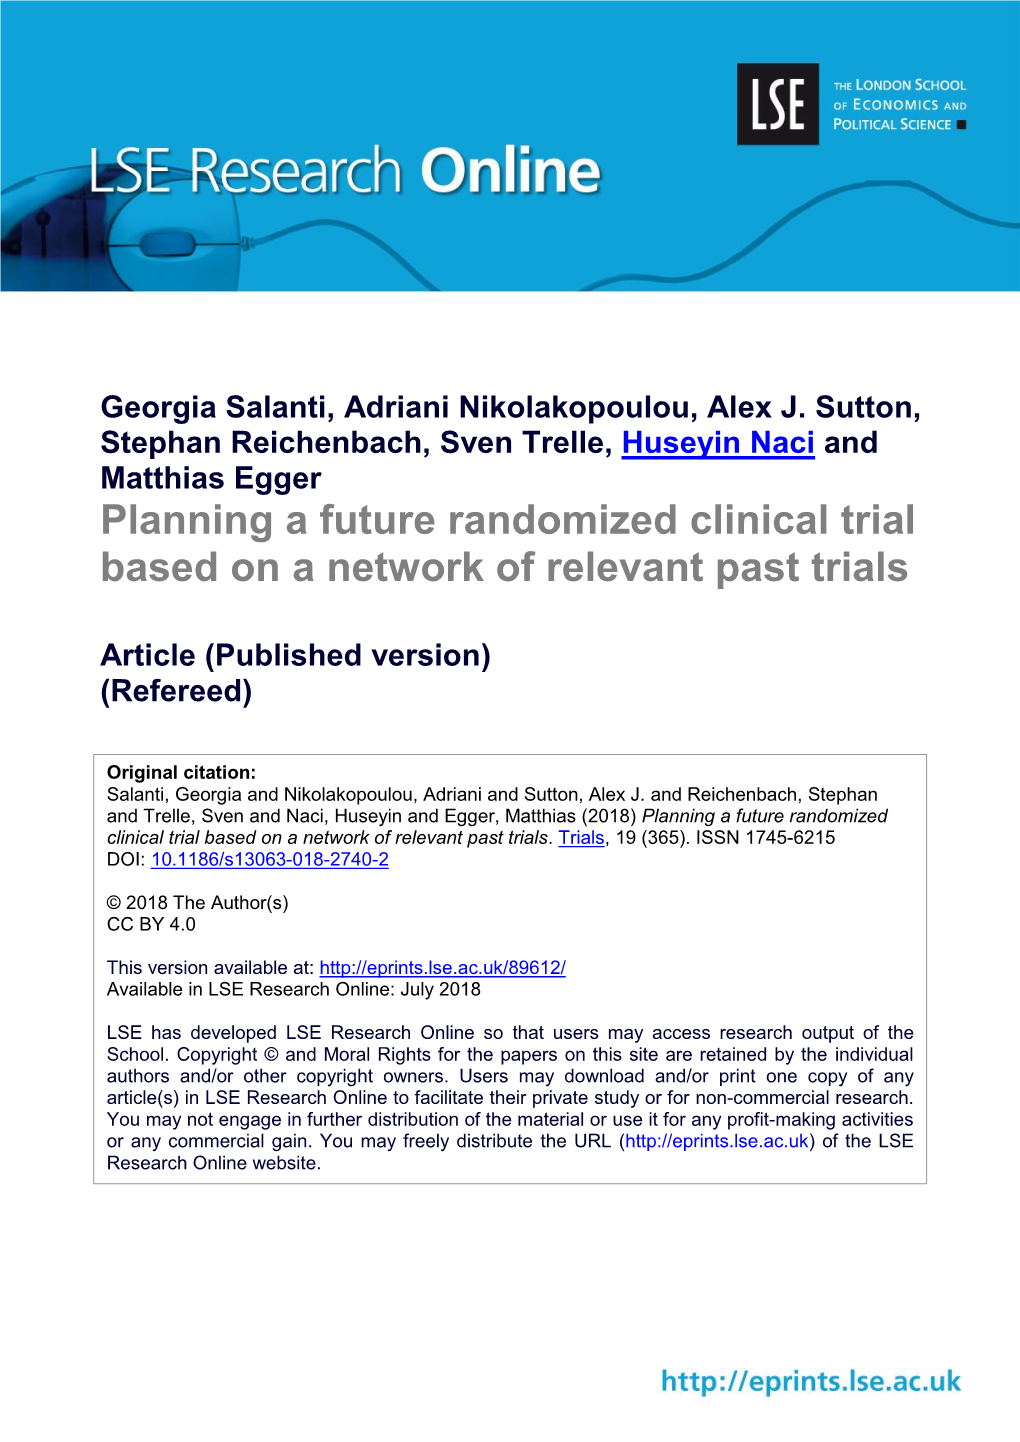 Planning a Future Randomized Clinical Trial Based on a Network of Relevant Past Trials